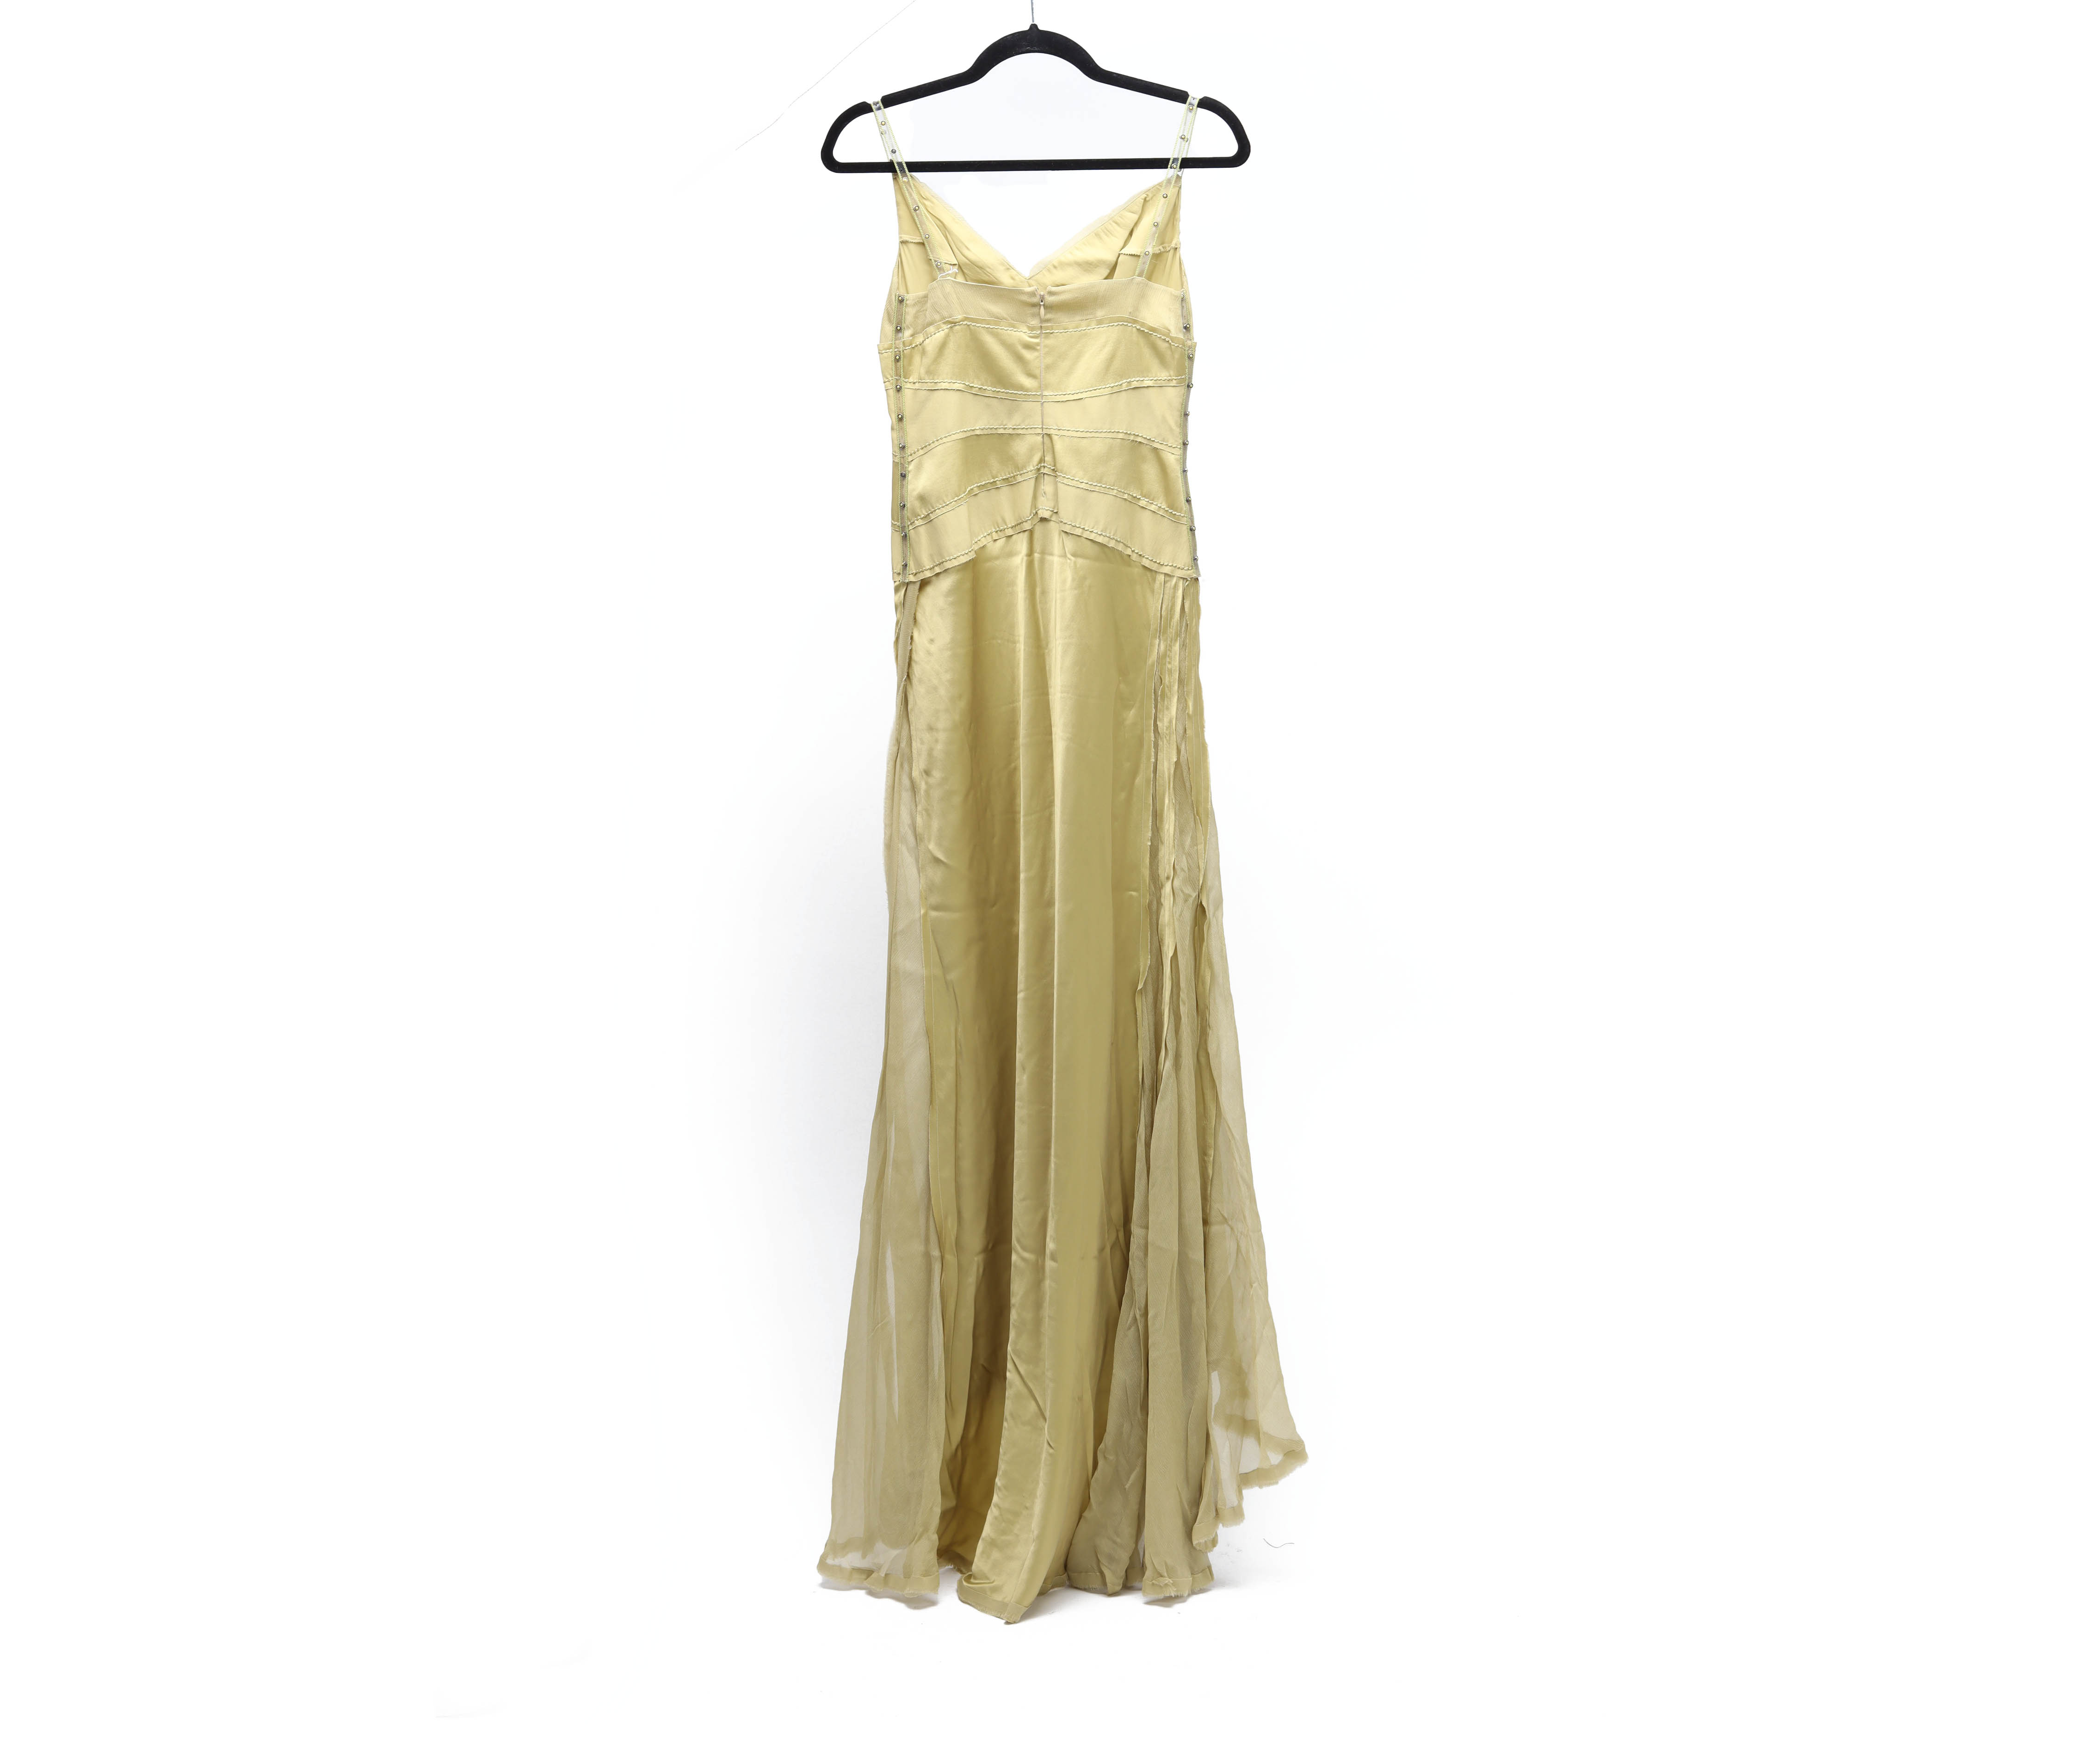 AN ERMANNO SCERVINO GREEN SATIN EVENING DRESS - Image 2 of 3